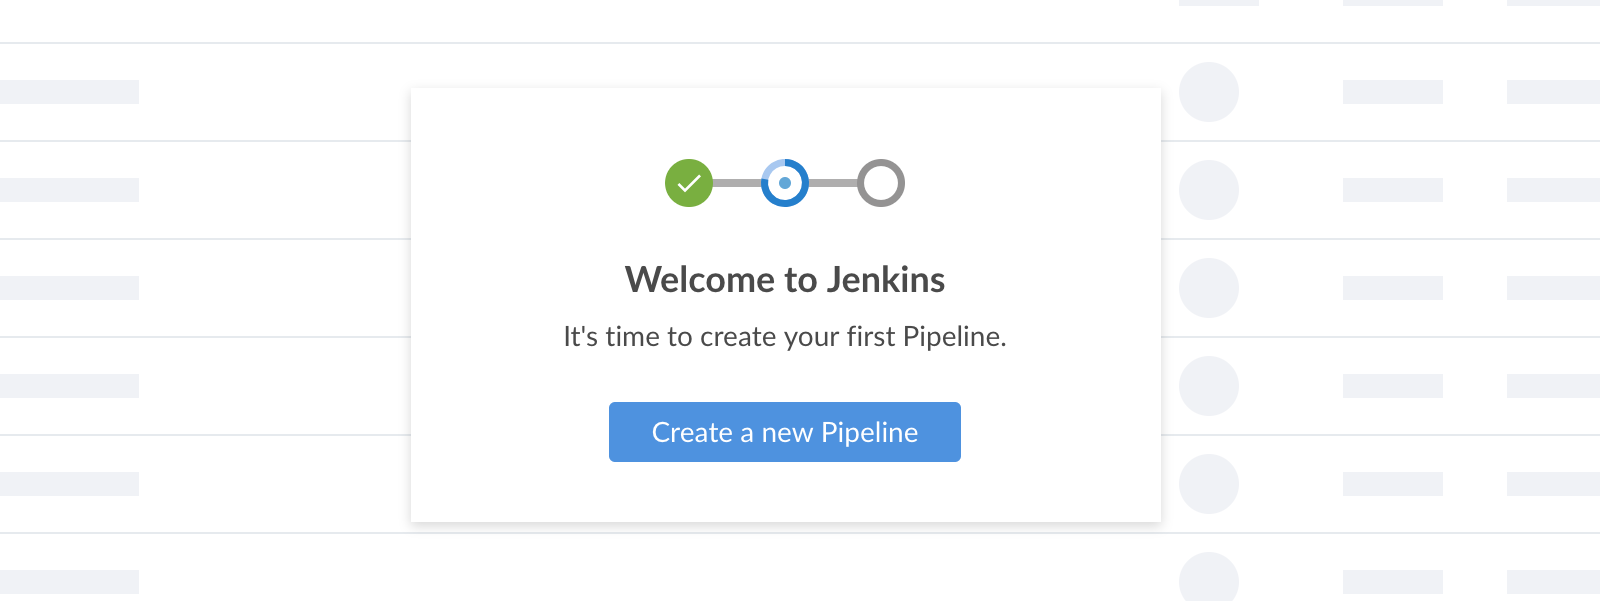 Welcome to Jenkins - create Pipeline